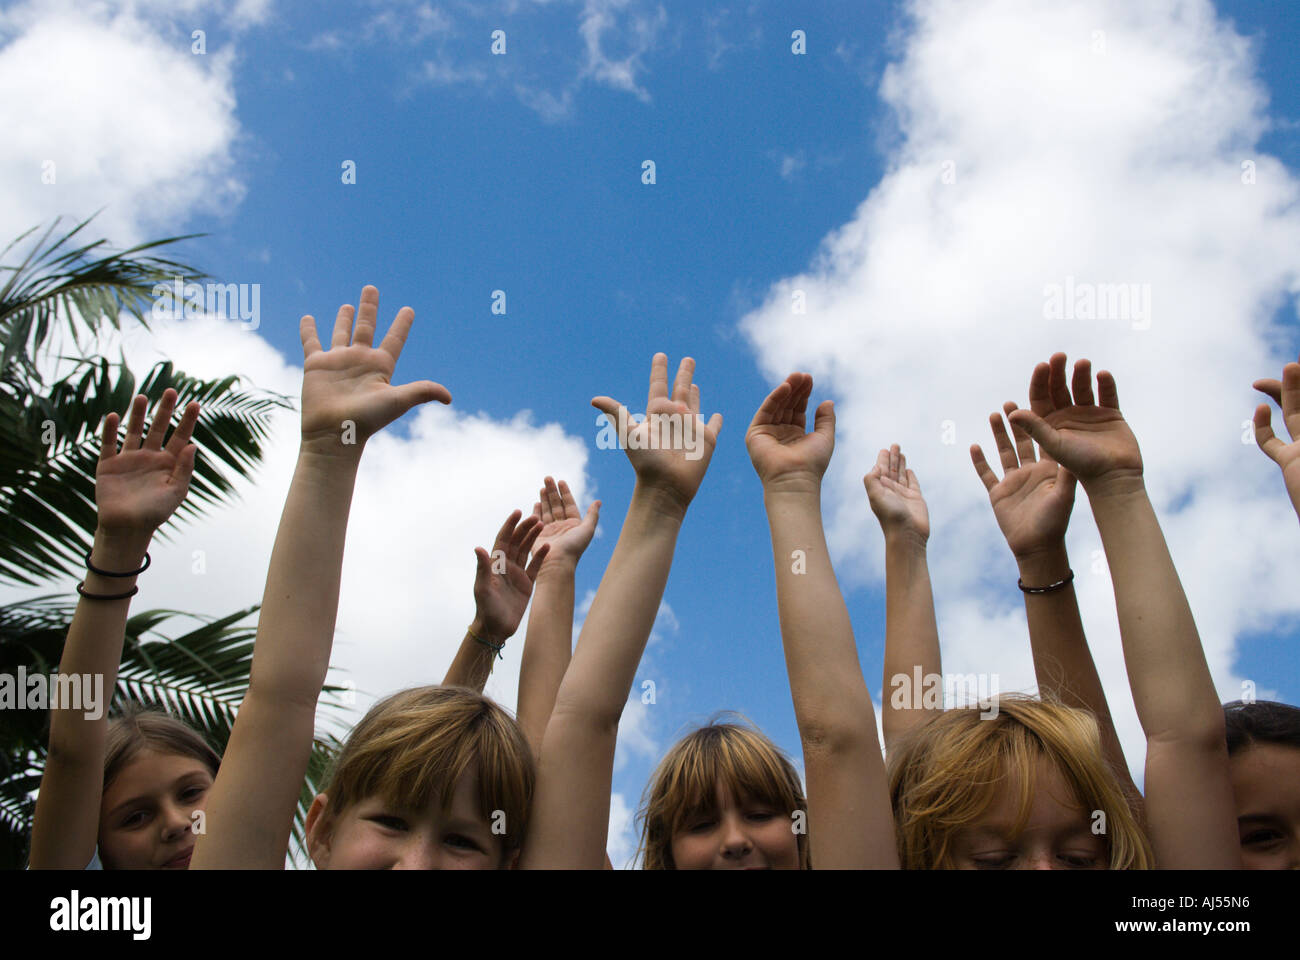 Children with arms in the air Kauai Hawaii Stock Photo